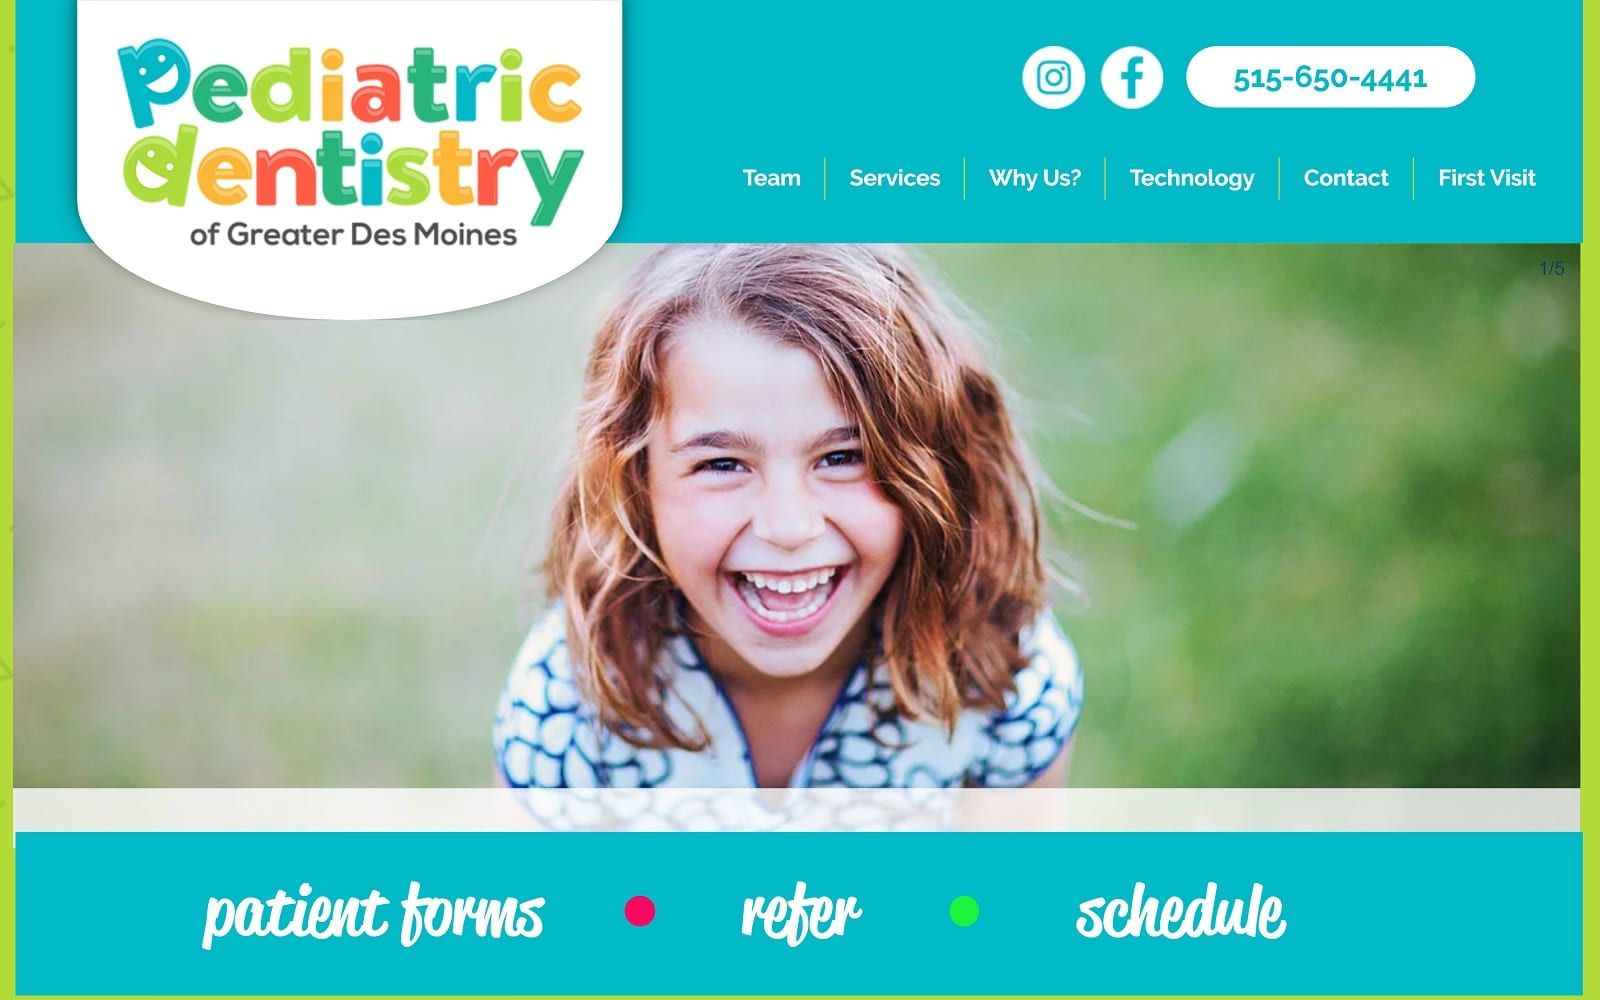 The screenshot of pediatric dentistry of greater des moines drmollydentistry. Com website